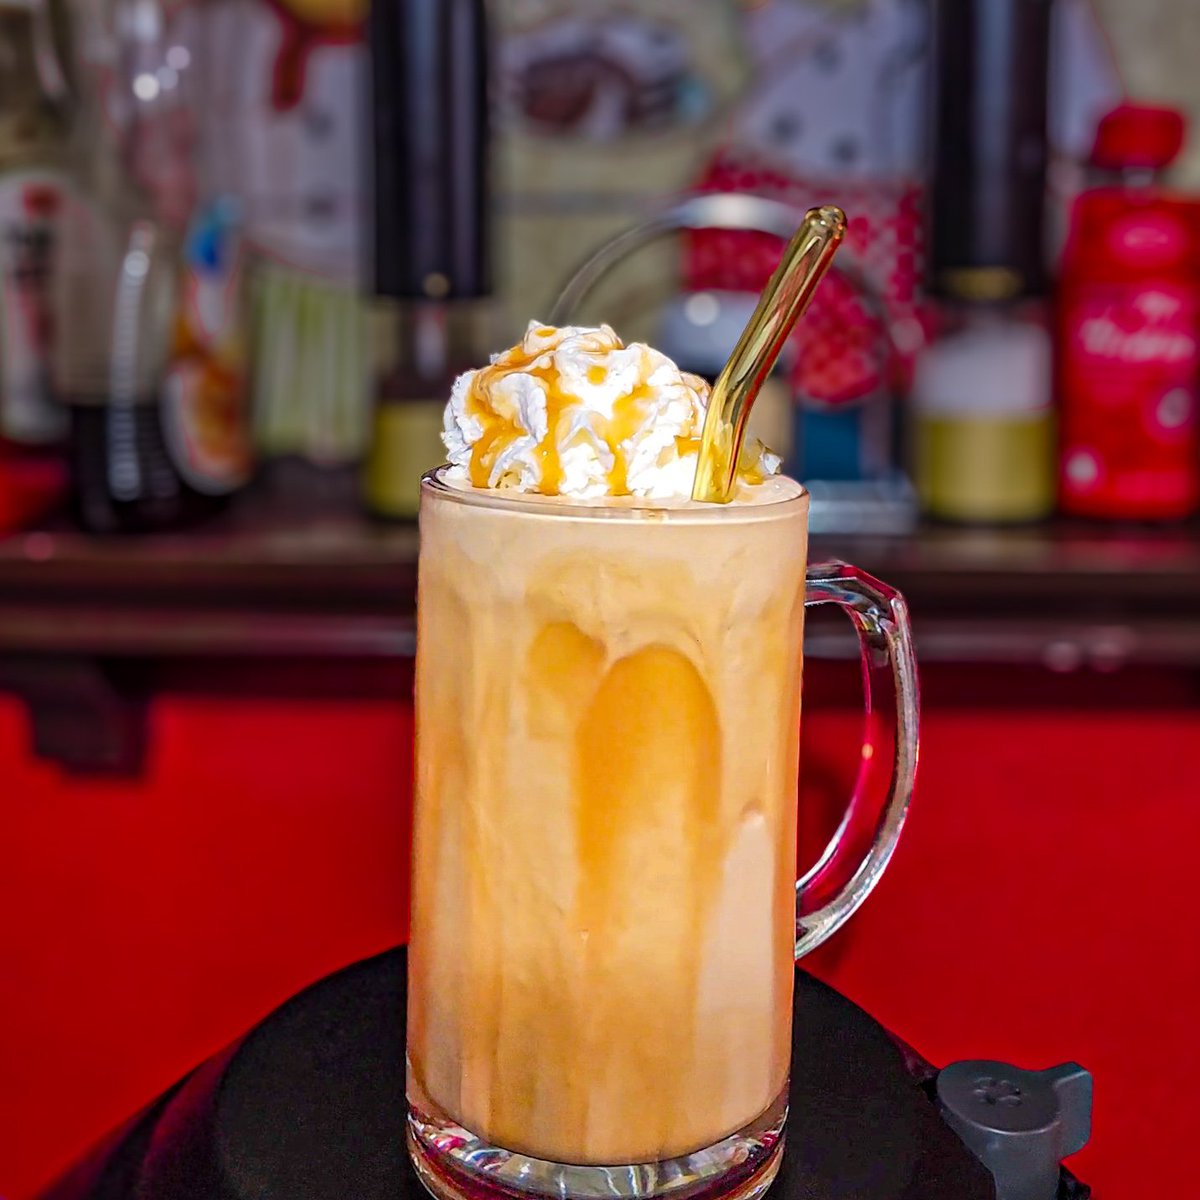 Just whipped up my signature caramel frappuccino at home. This drink always hits. What's your favorite homemade drink?  
.  
.  
.  
#HomeLife #SpringVibes